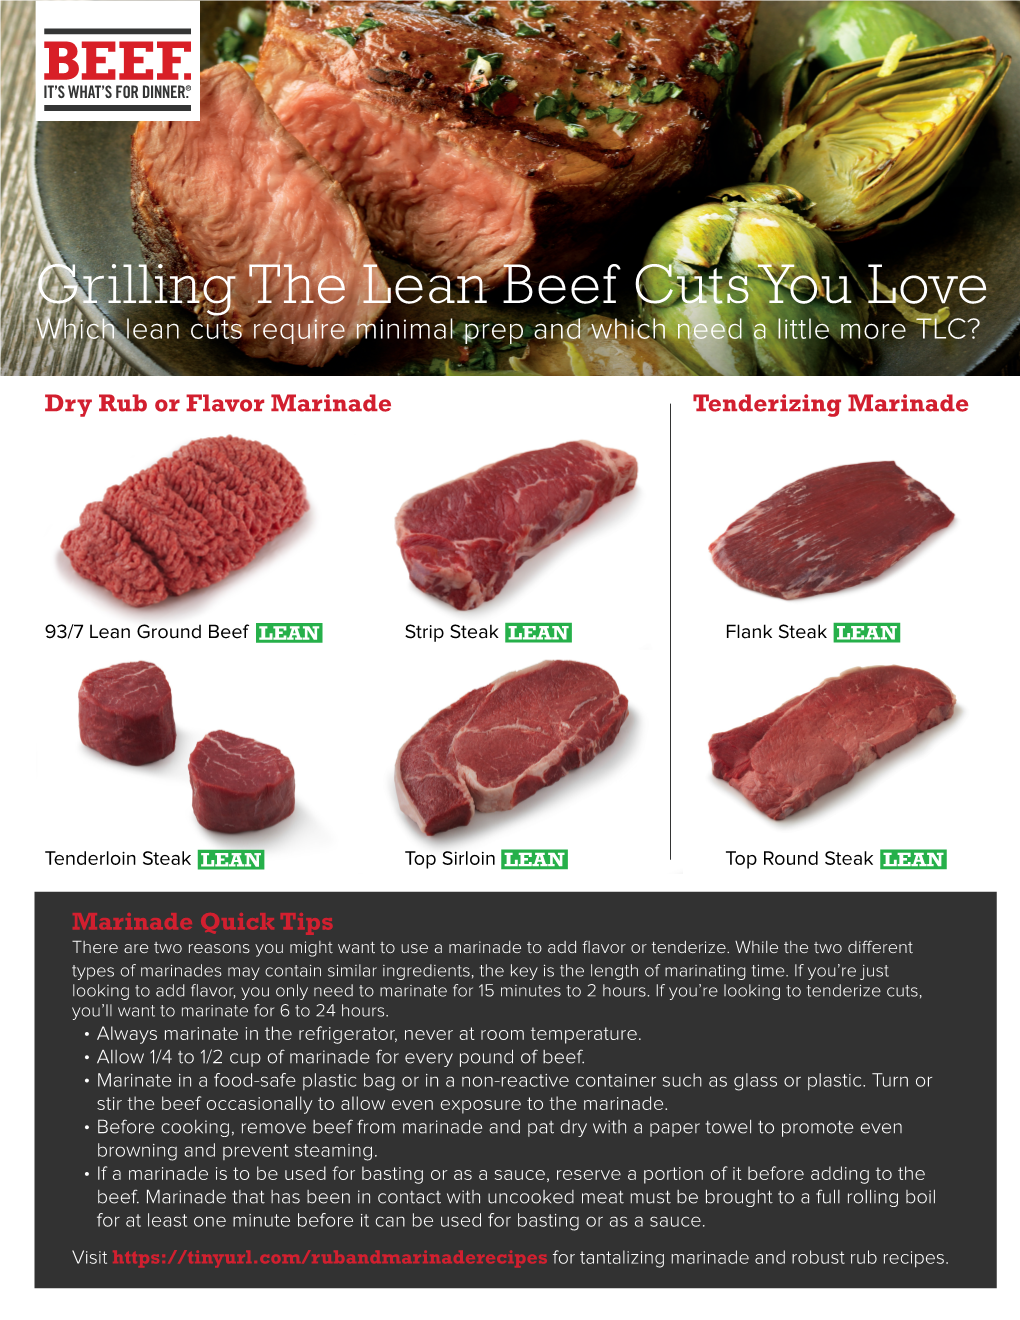 Grilling the Lean Beef Cuts You Love Which Lean Cuts Require Minimal Prep and Which Need a Little More TLC?